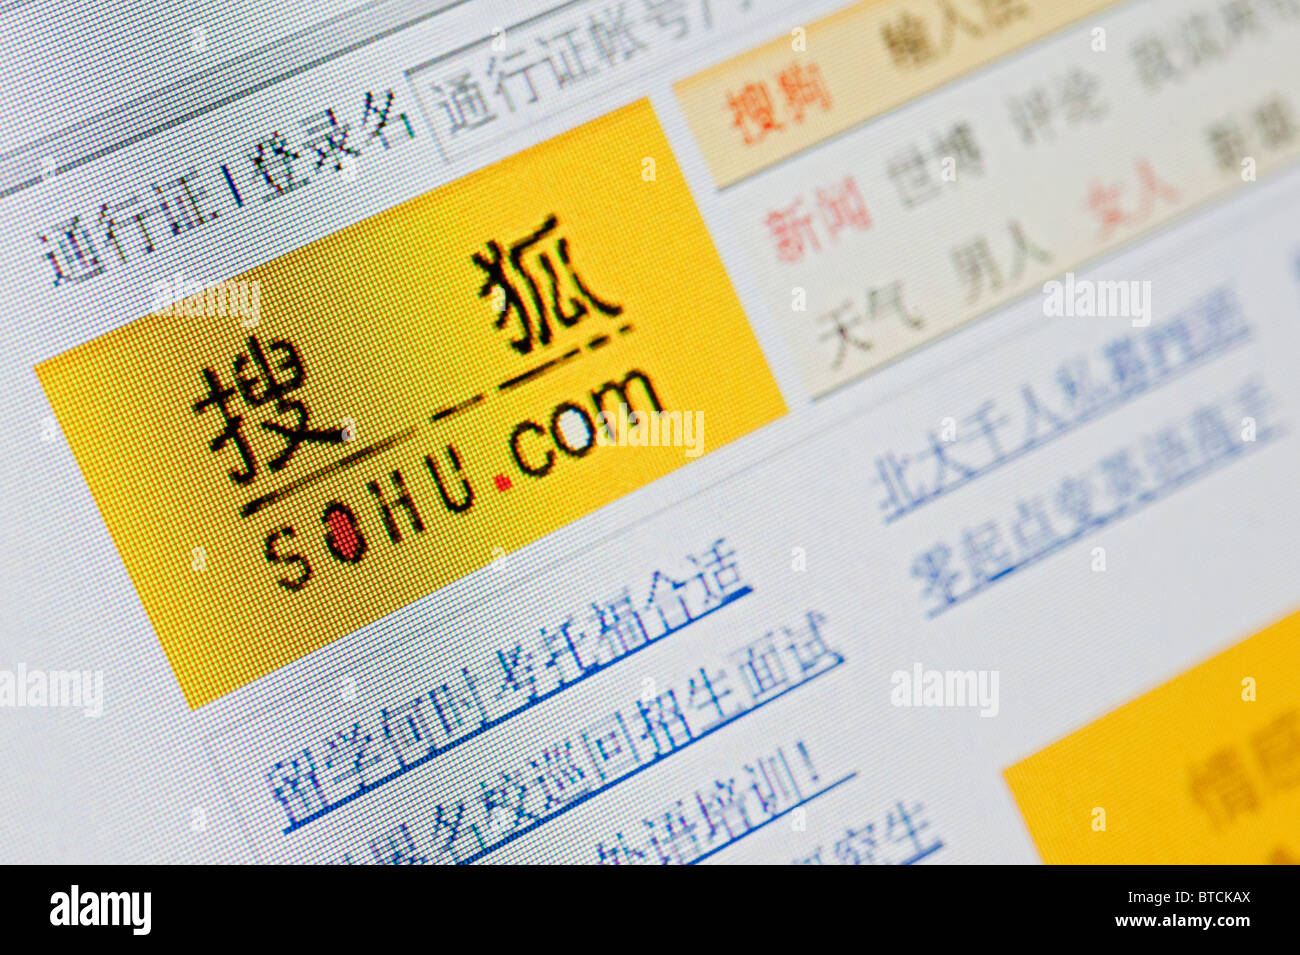 Detail of screenshot from website of Chinese SoHu website portal Stock Photo